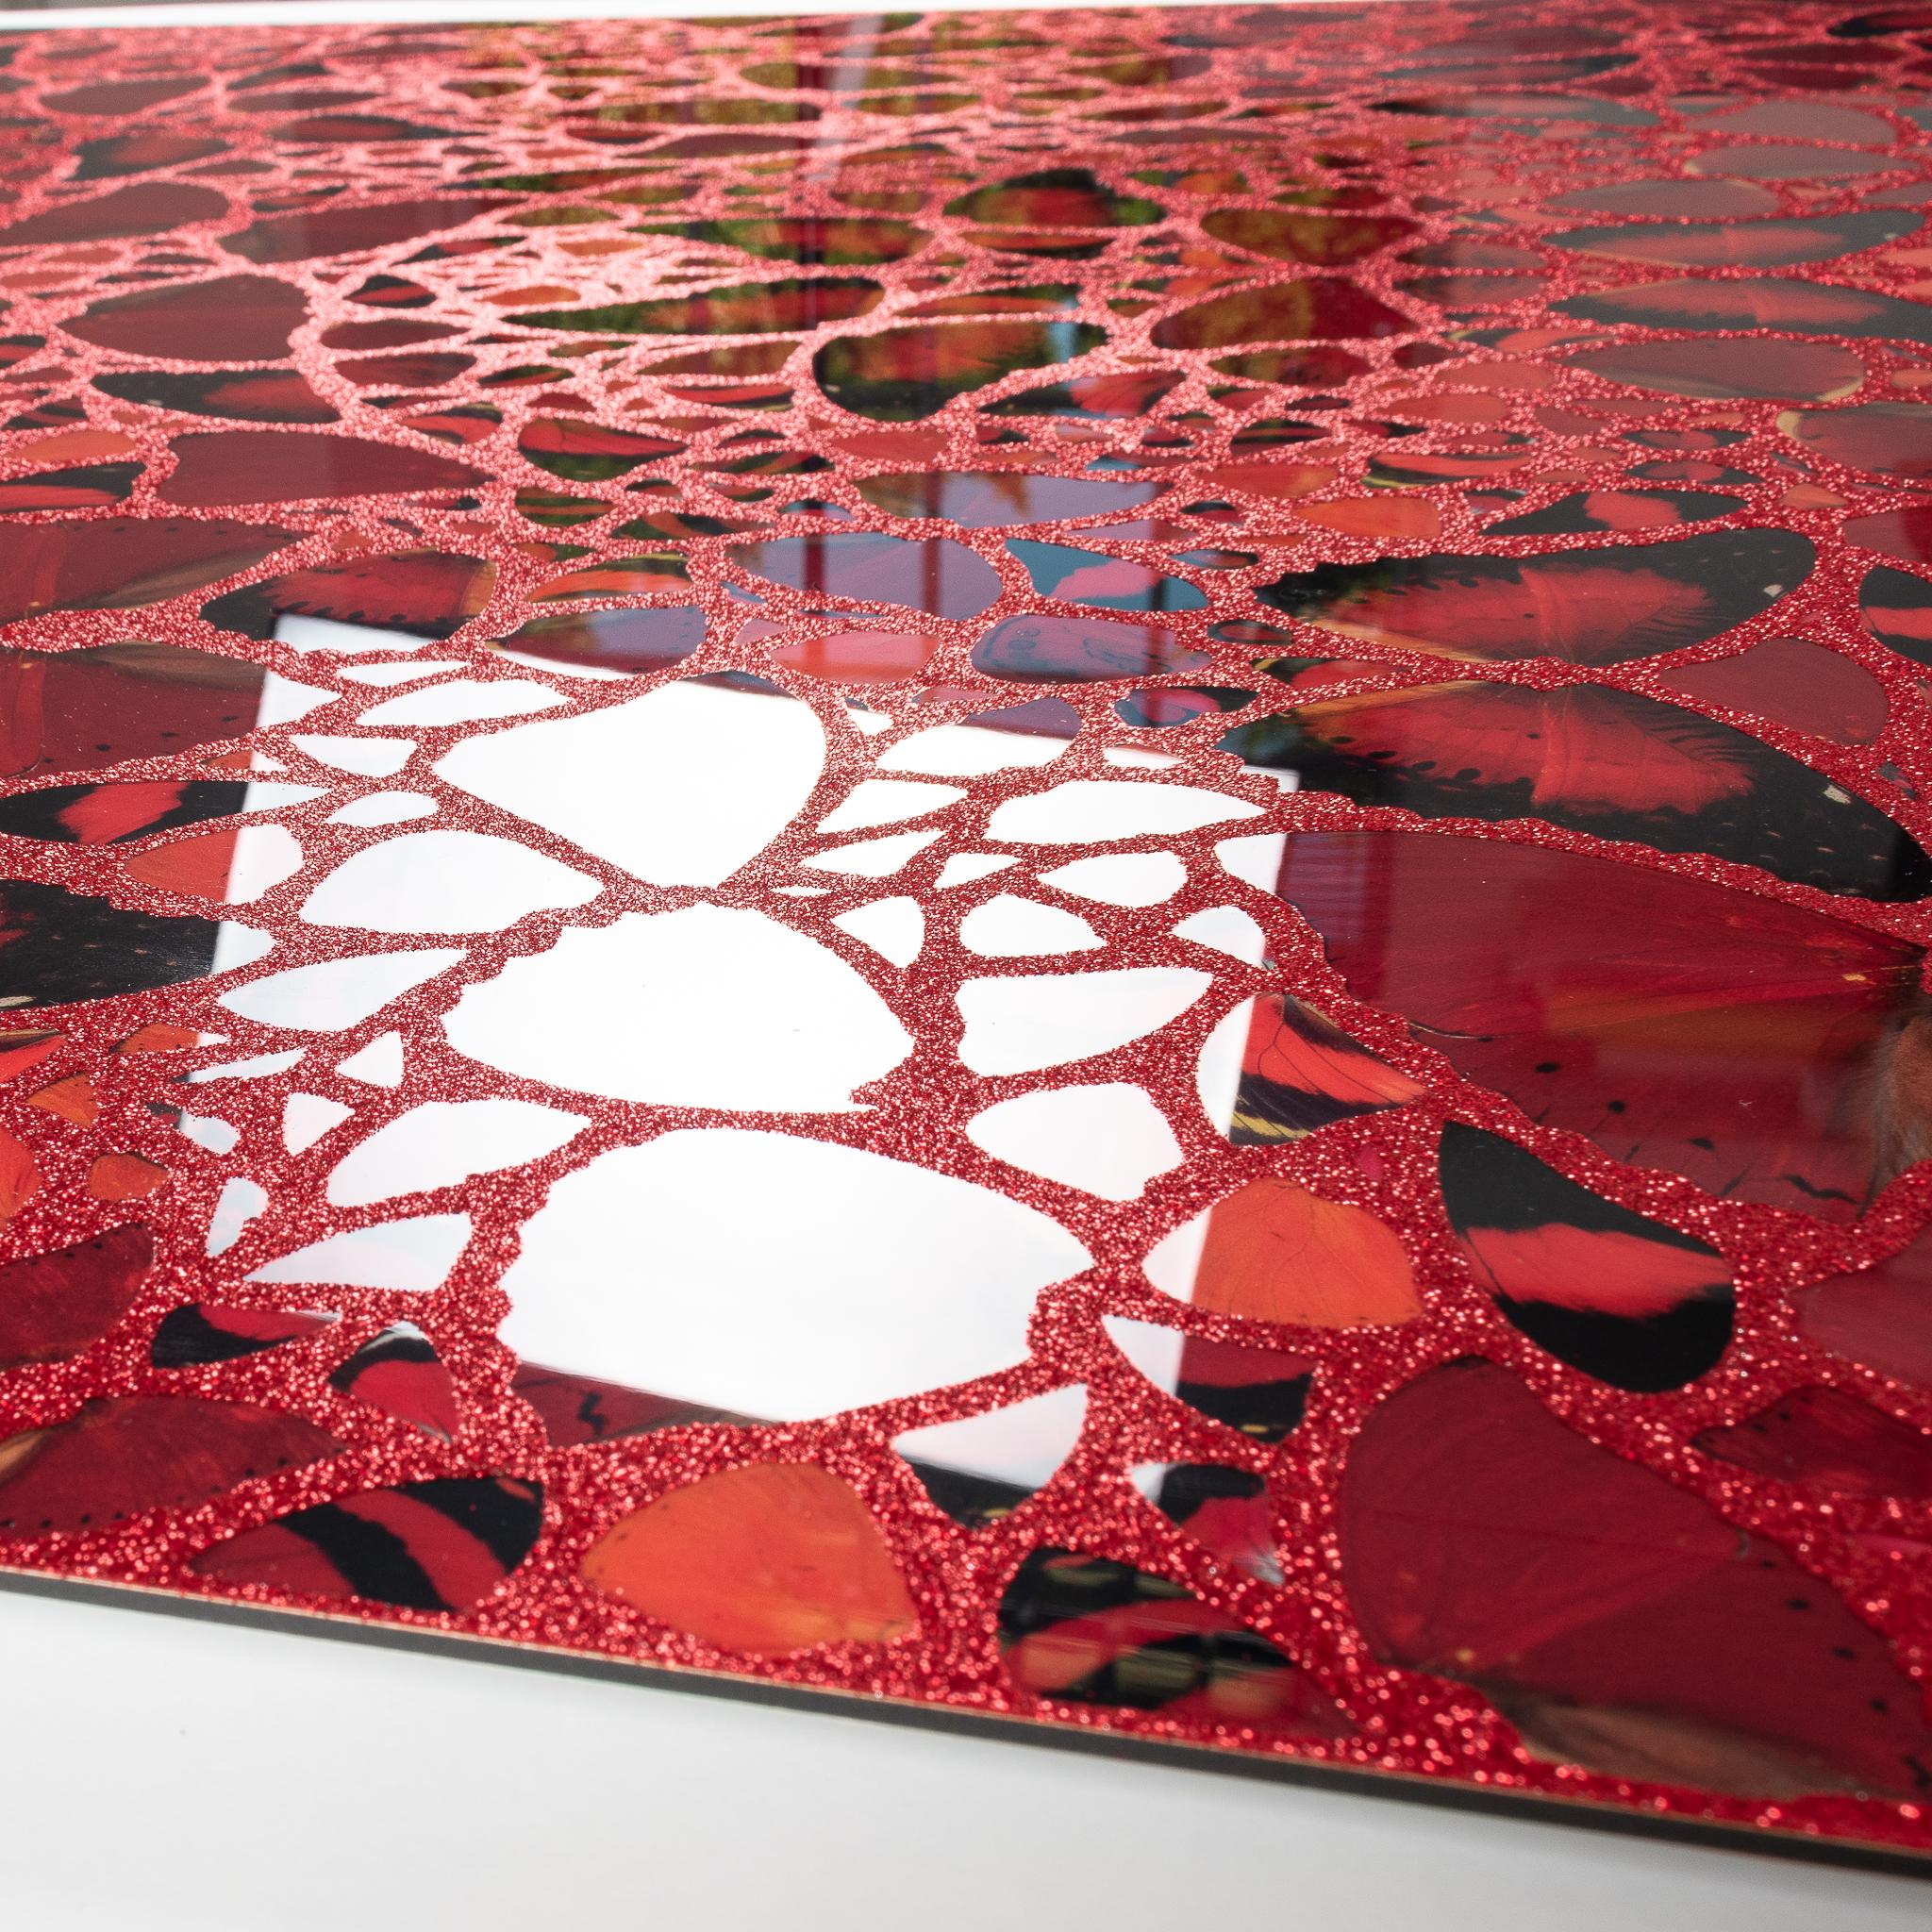 H10-3 Theodora (from the Empresses) - Red Abstract Print by Damien Hirst